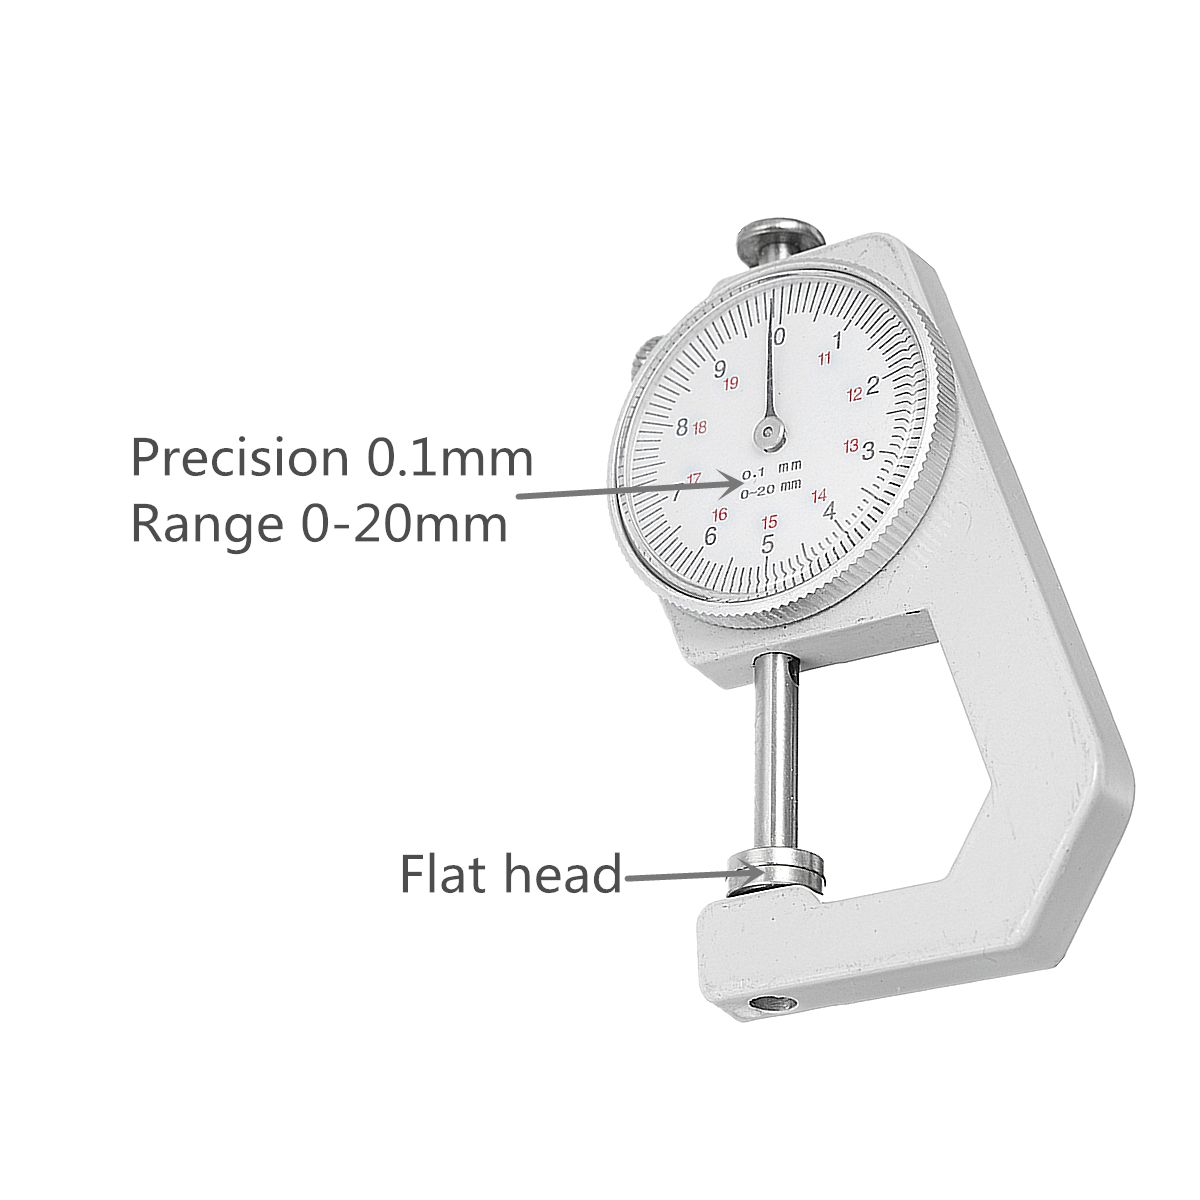 0-20mm-Metal-Leather-Craft-Toll-Thickness-Gauge-Measure-Tester-Dial-1403025